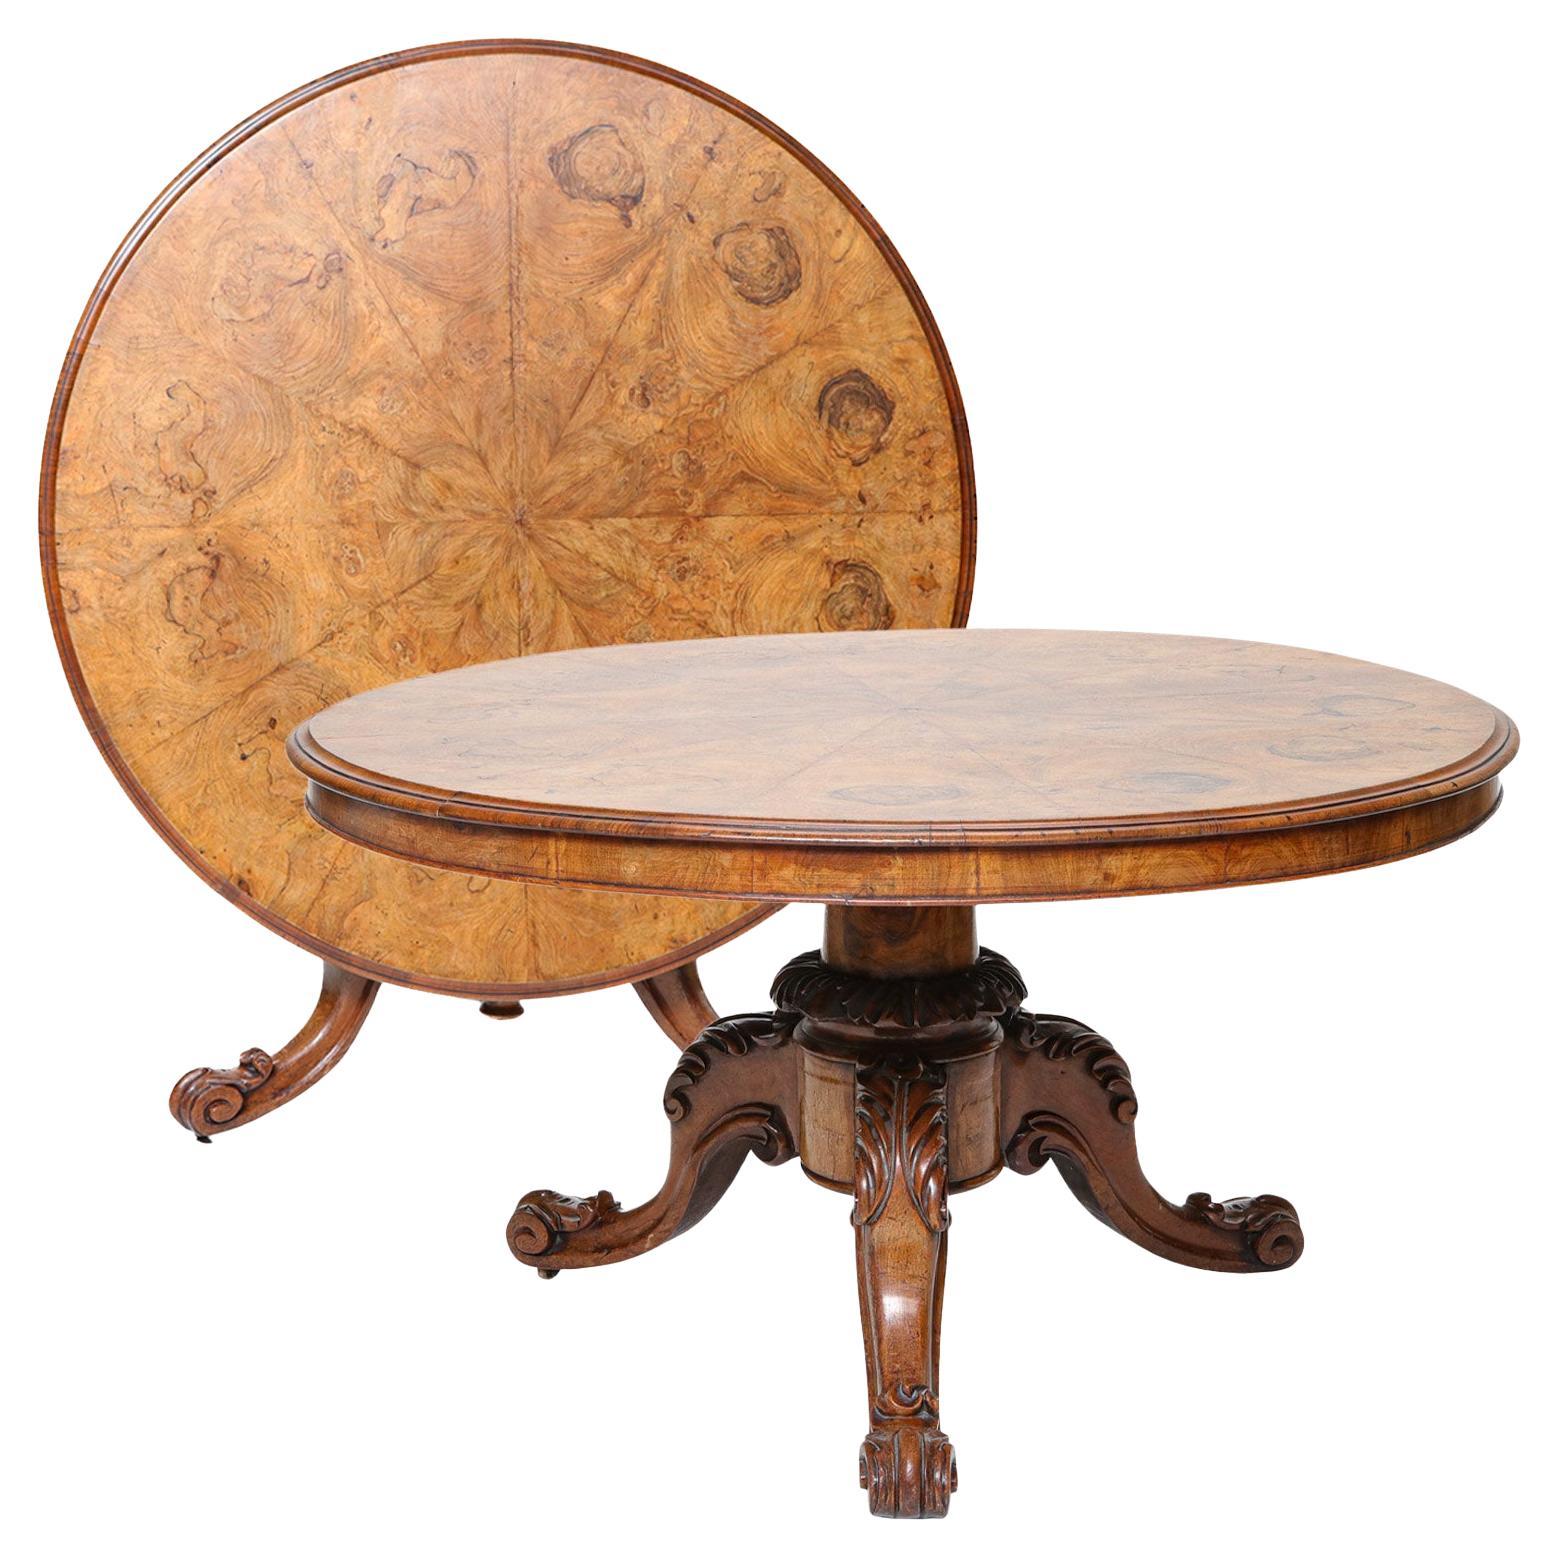 19th C. Circular Walnut Tip Top Center Table with Burl Veneered Pie Crust Top For Sale